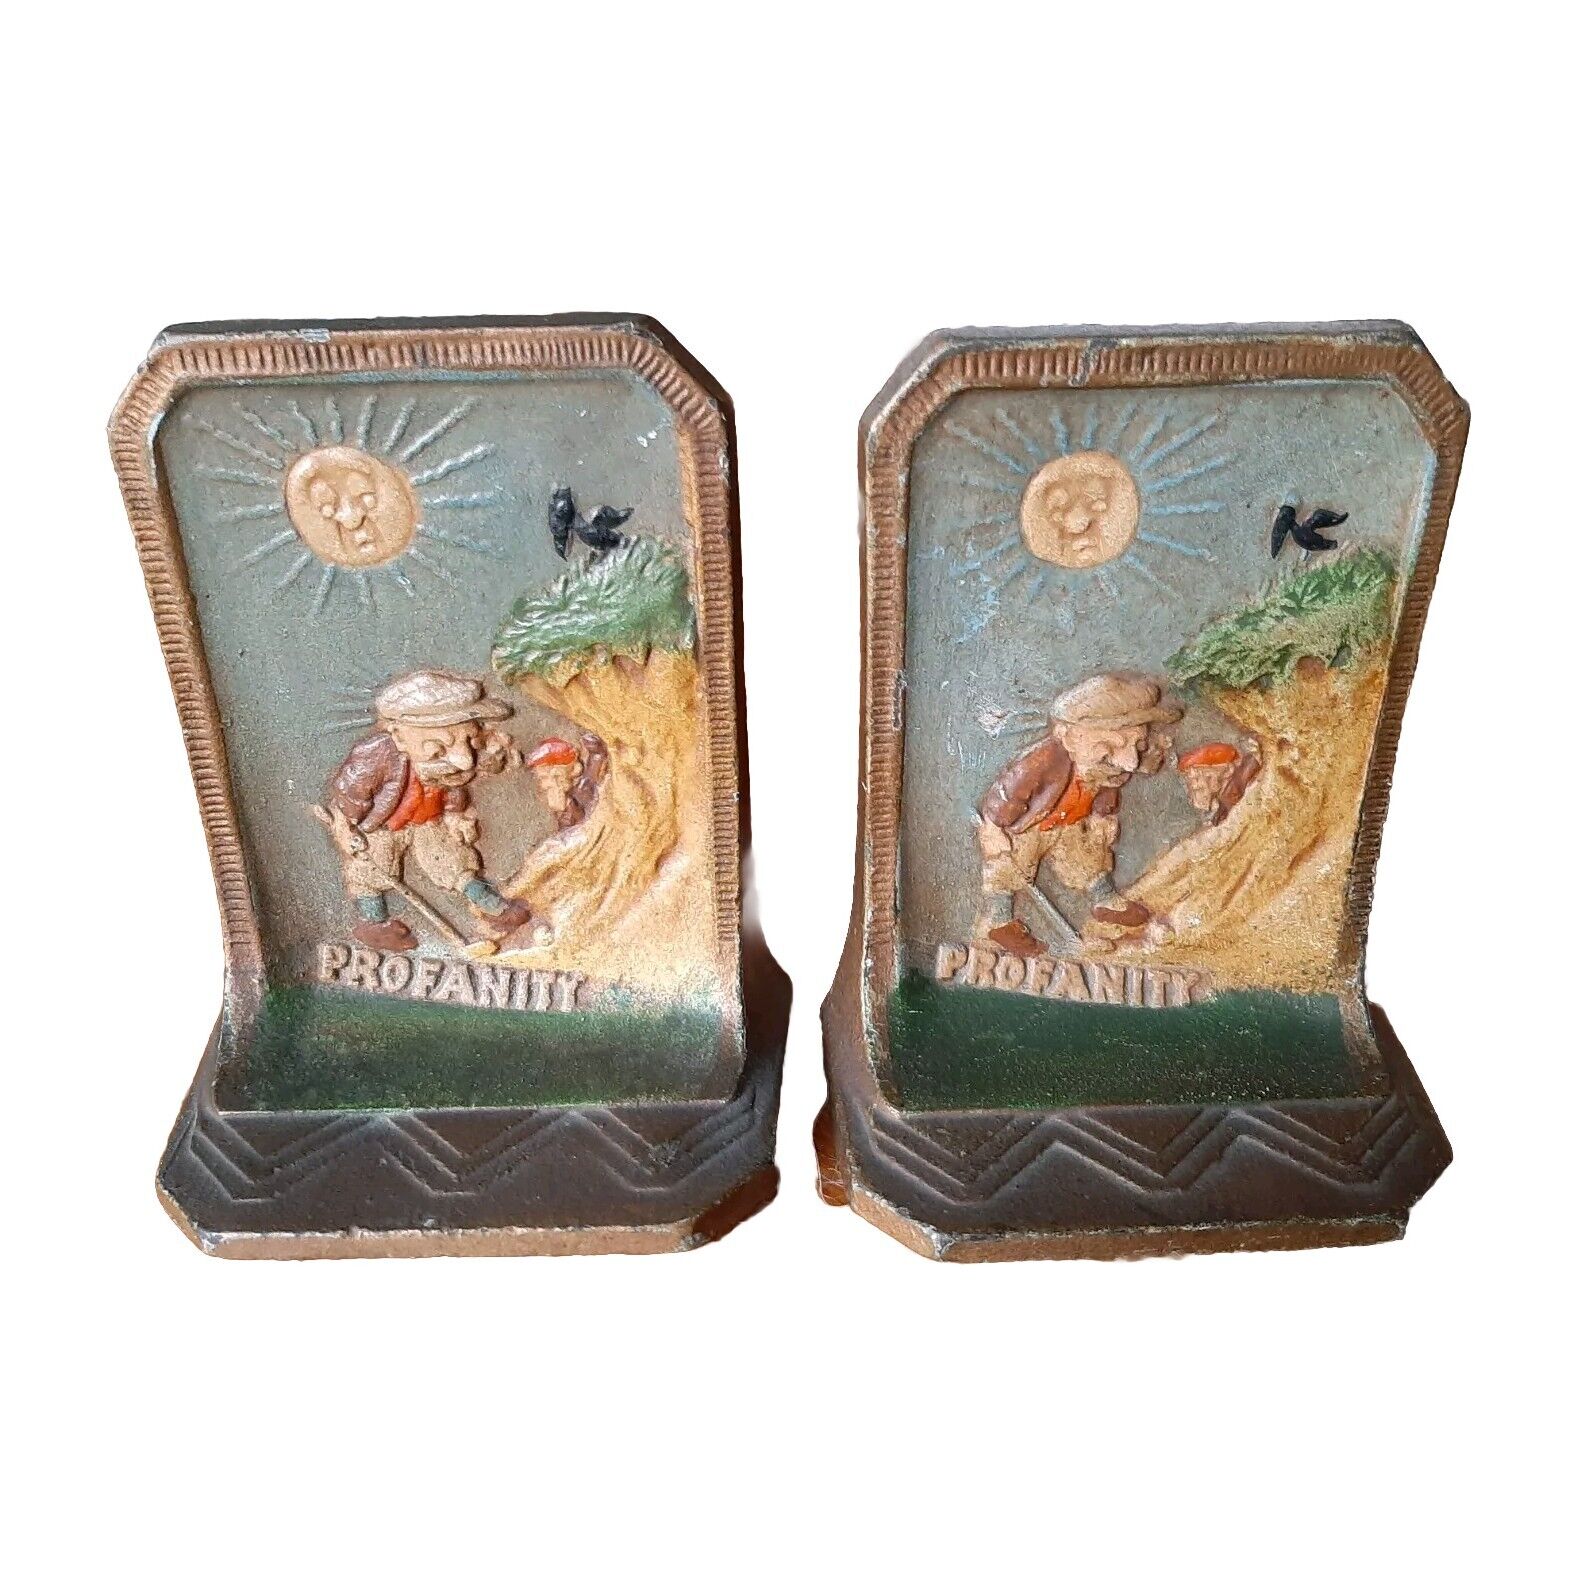  Pair Of Polychrome Profanity Golfer  Bookends, Connecticut Foundry Co., 1928